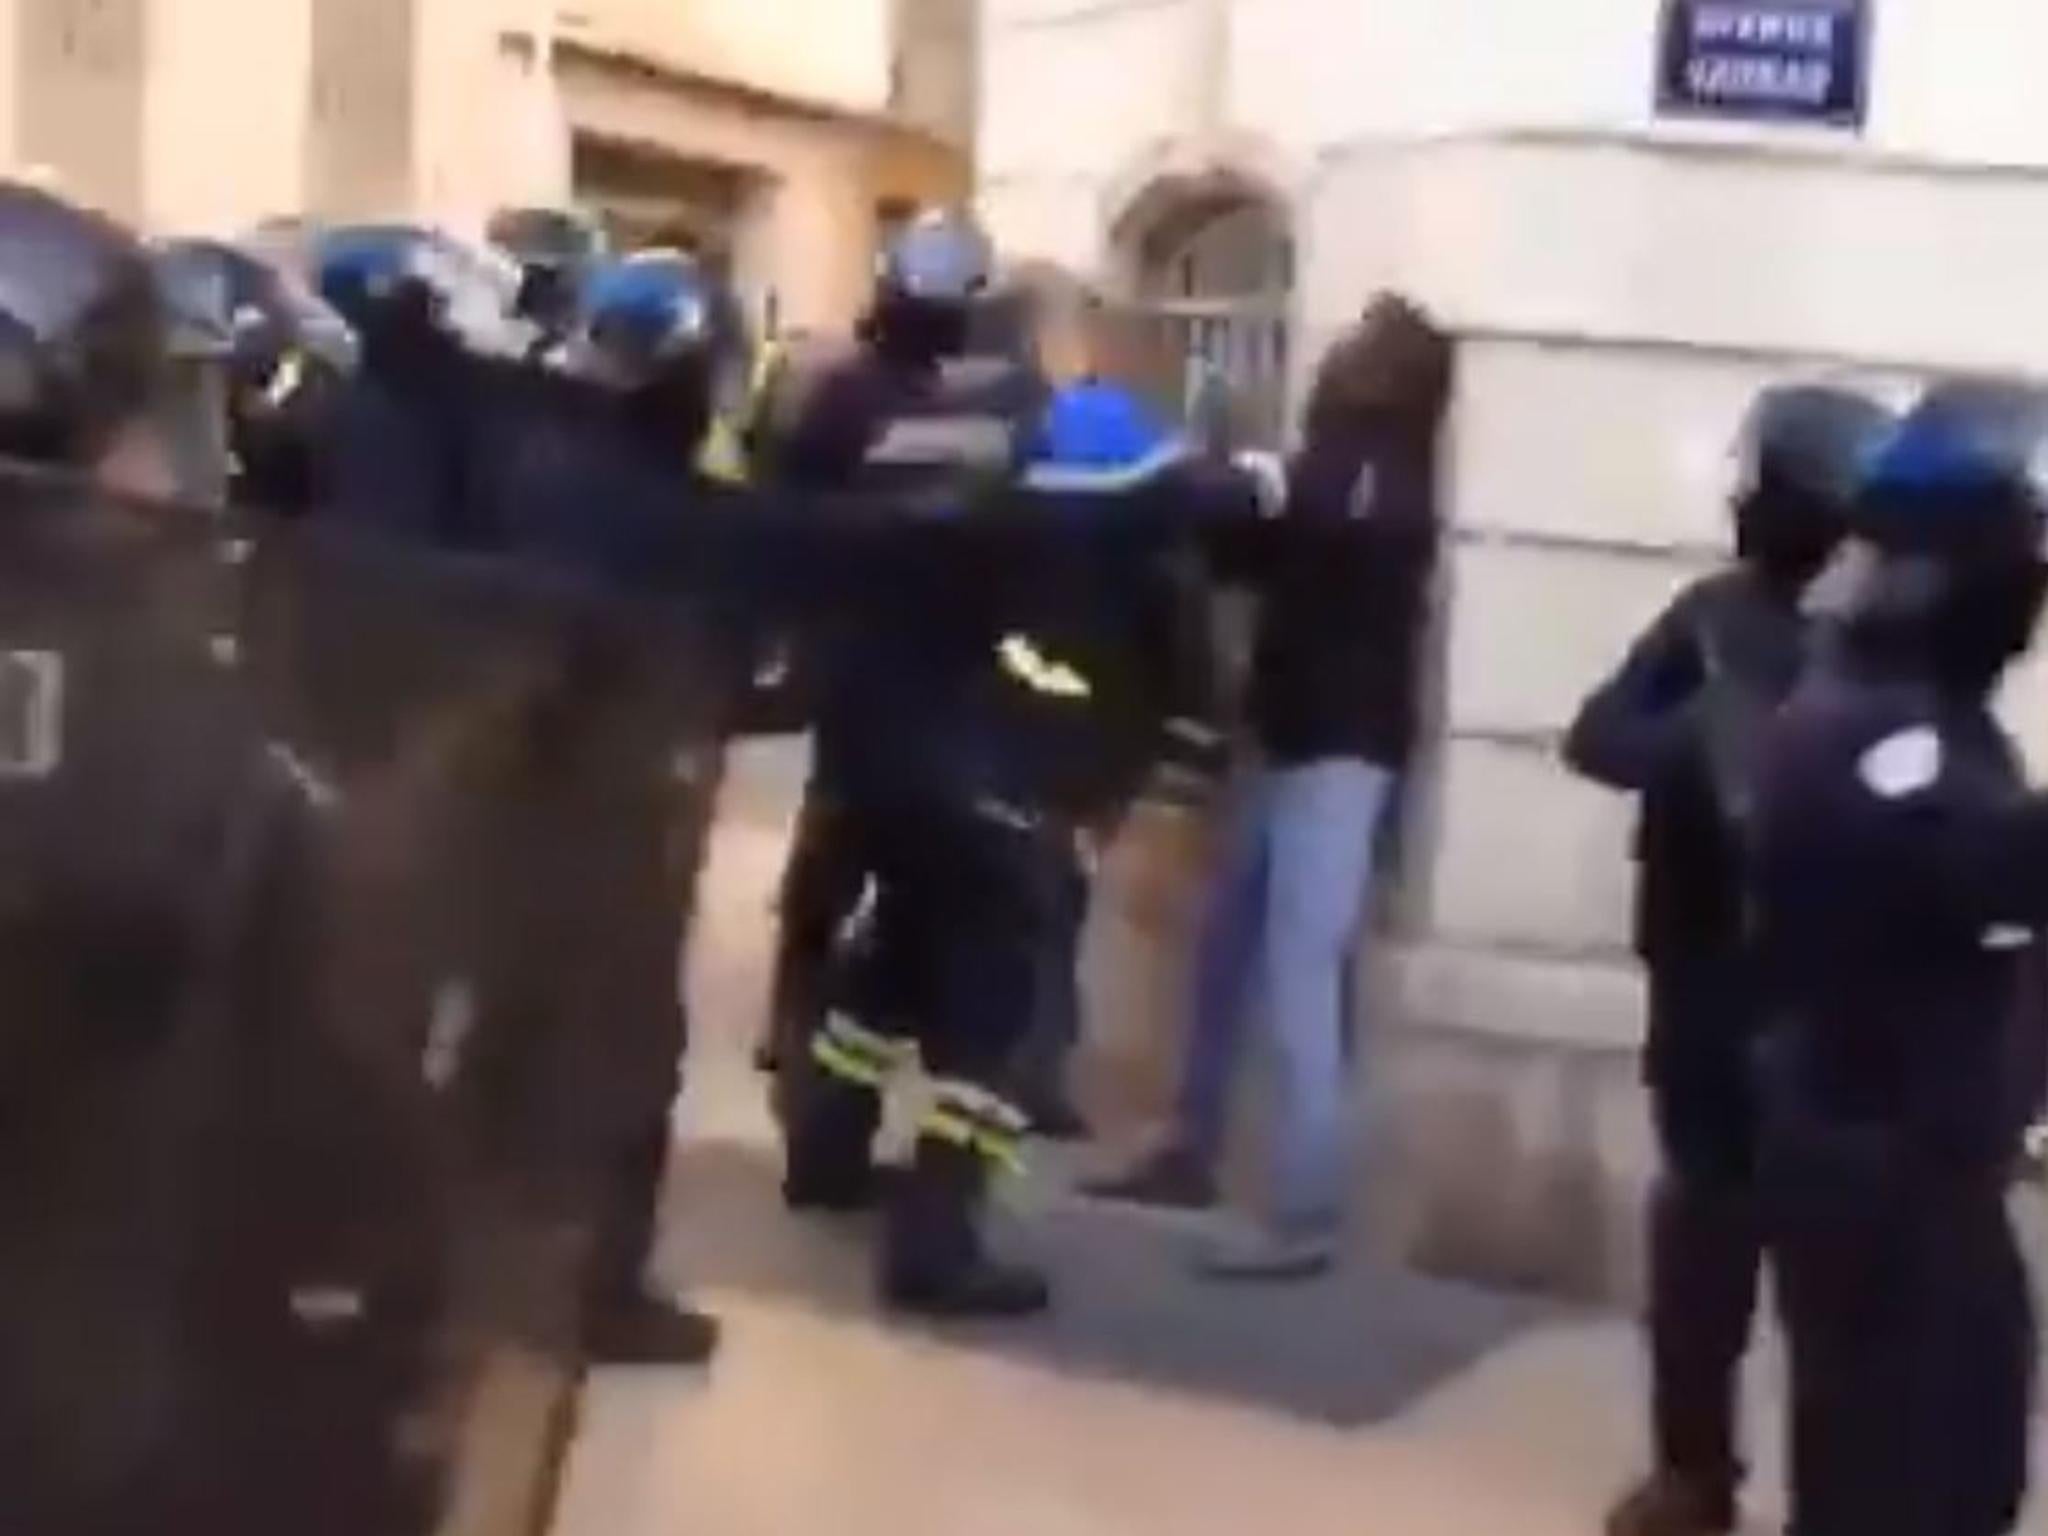 Didier Andrieux was filmed punching the demonstrator in the city of Toulon on Saturday